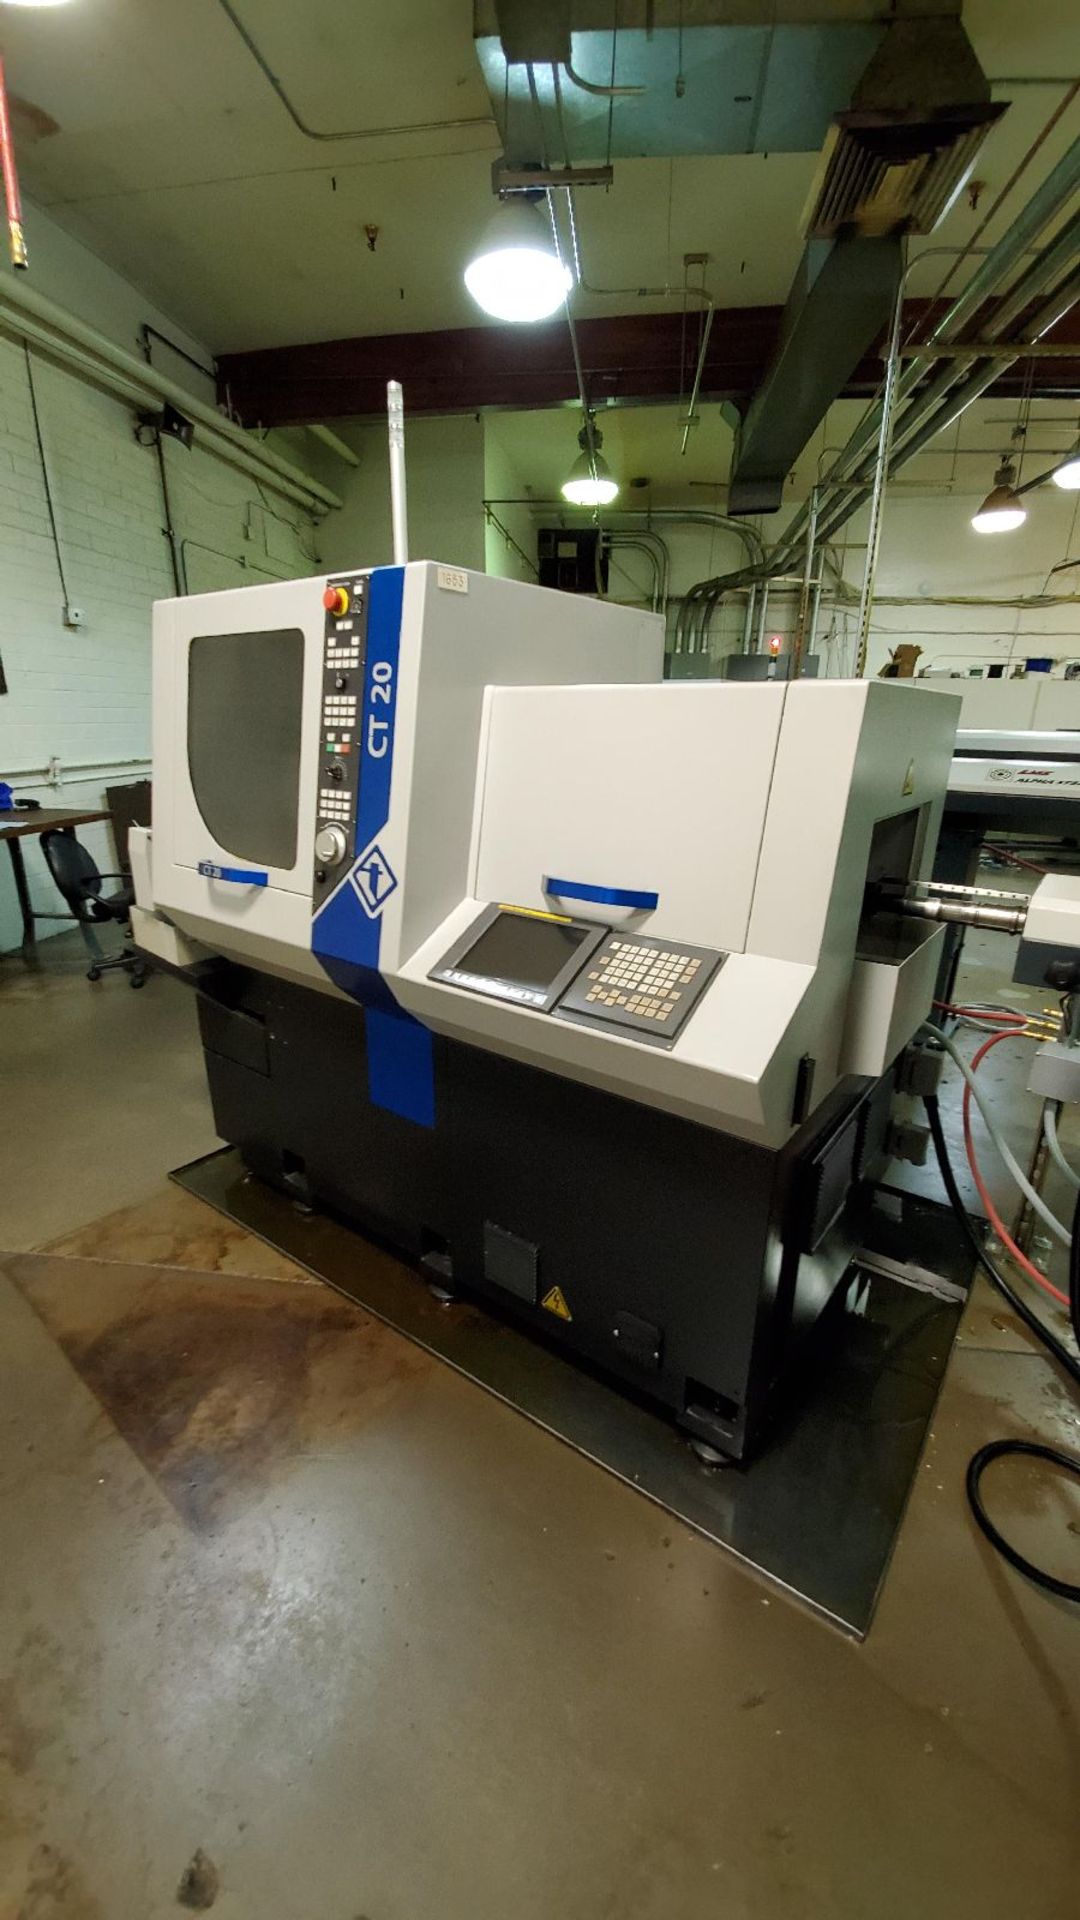 Tornos Model CT 20 7-Axis CNC Swiss-Type Lathe - Image 6 of 25